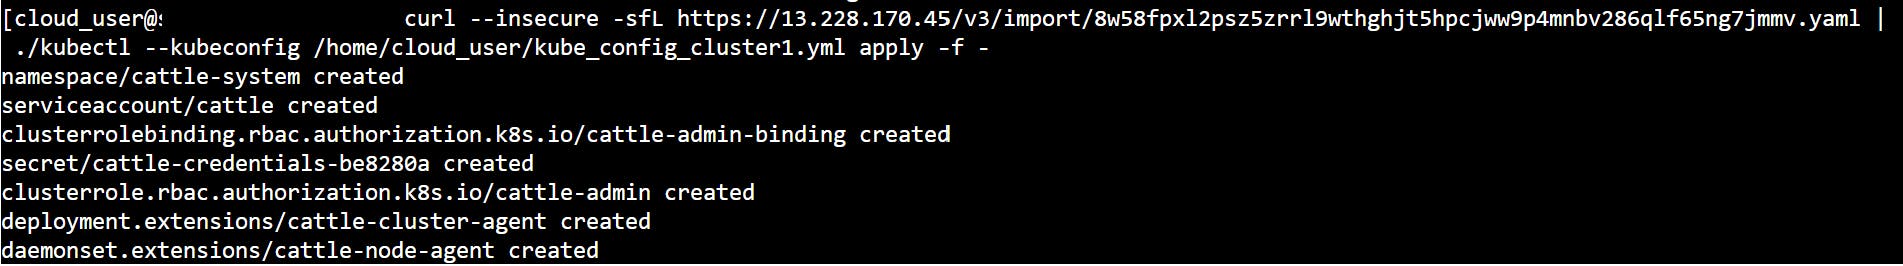 applying yaml file to the RKE cluster for rancher import